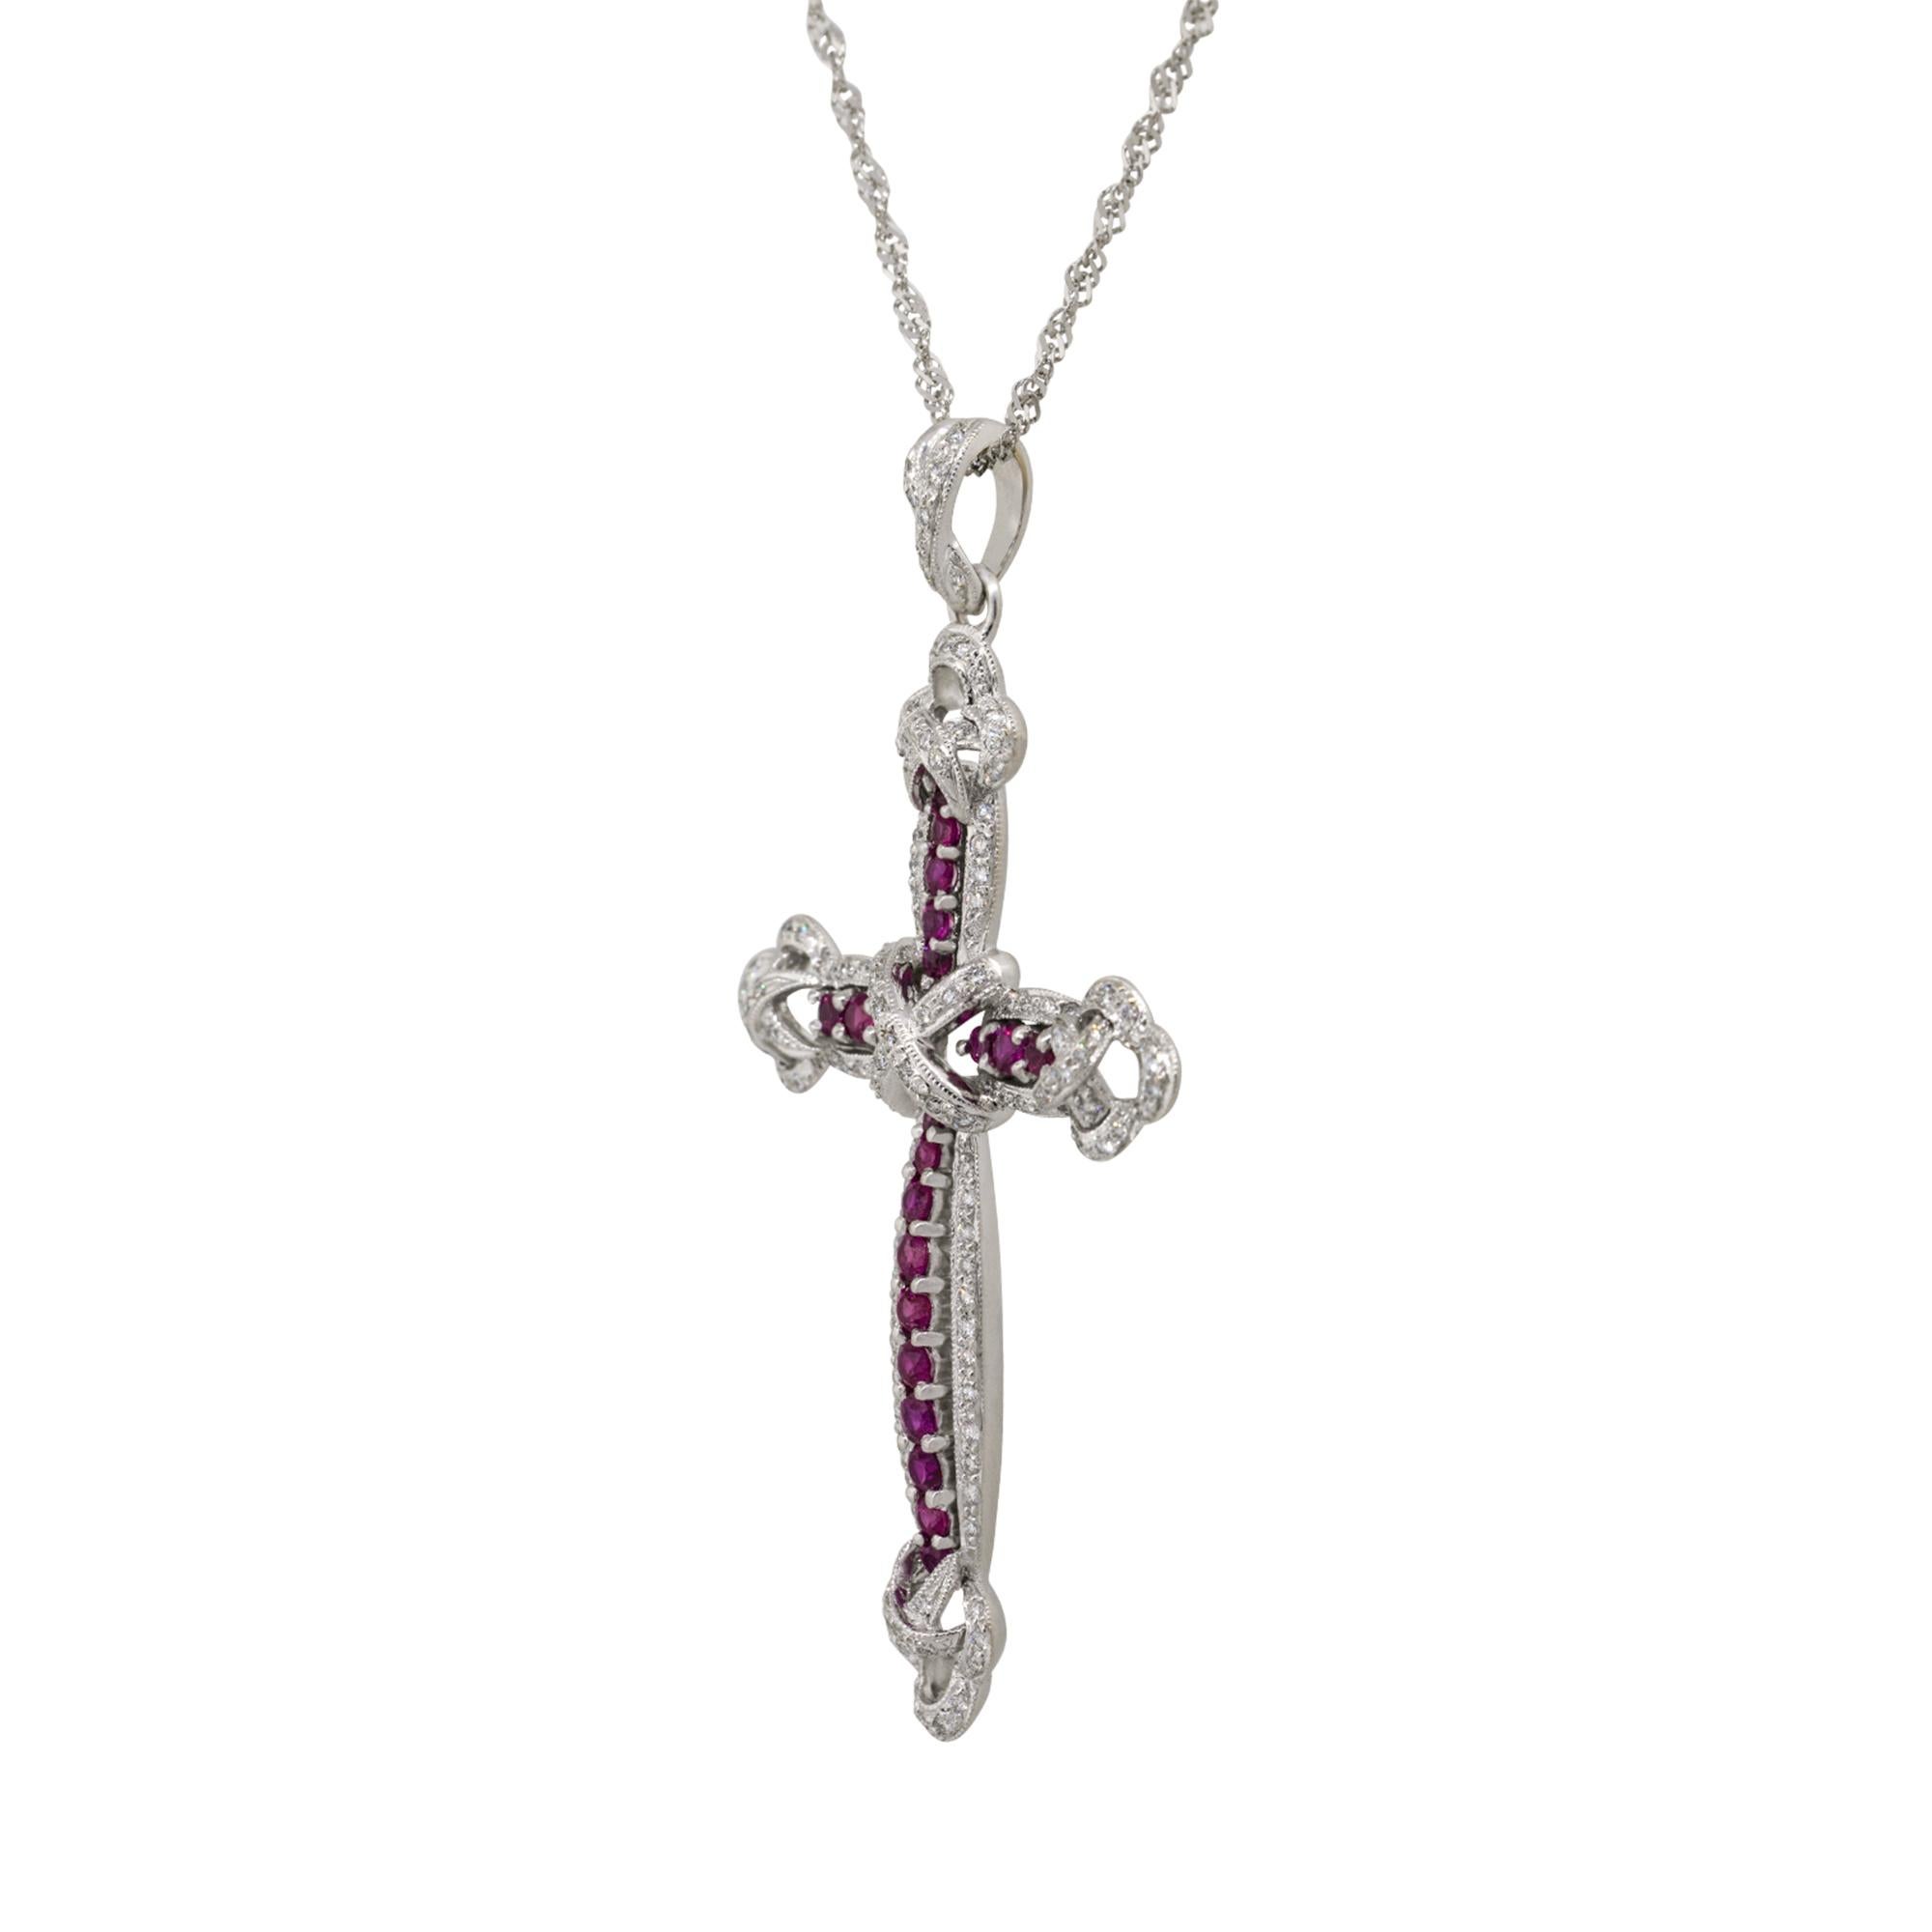 Material: 18k White Gold
Diamond Details: Approx. 0.88ctw of round cut diamonds. Diamonds are G/H in color and VS in clarity
Gemstone Details: Approx. 0.99ctw of round cut Ruby gemstones
Clasps: Lobster clasp
Total Weight: 7.7g (4.9dwt) 
Pendant